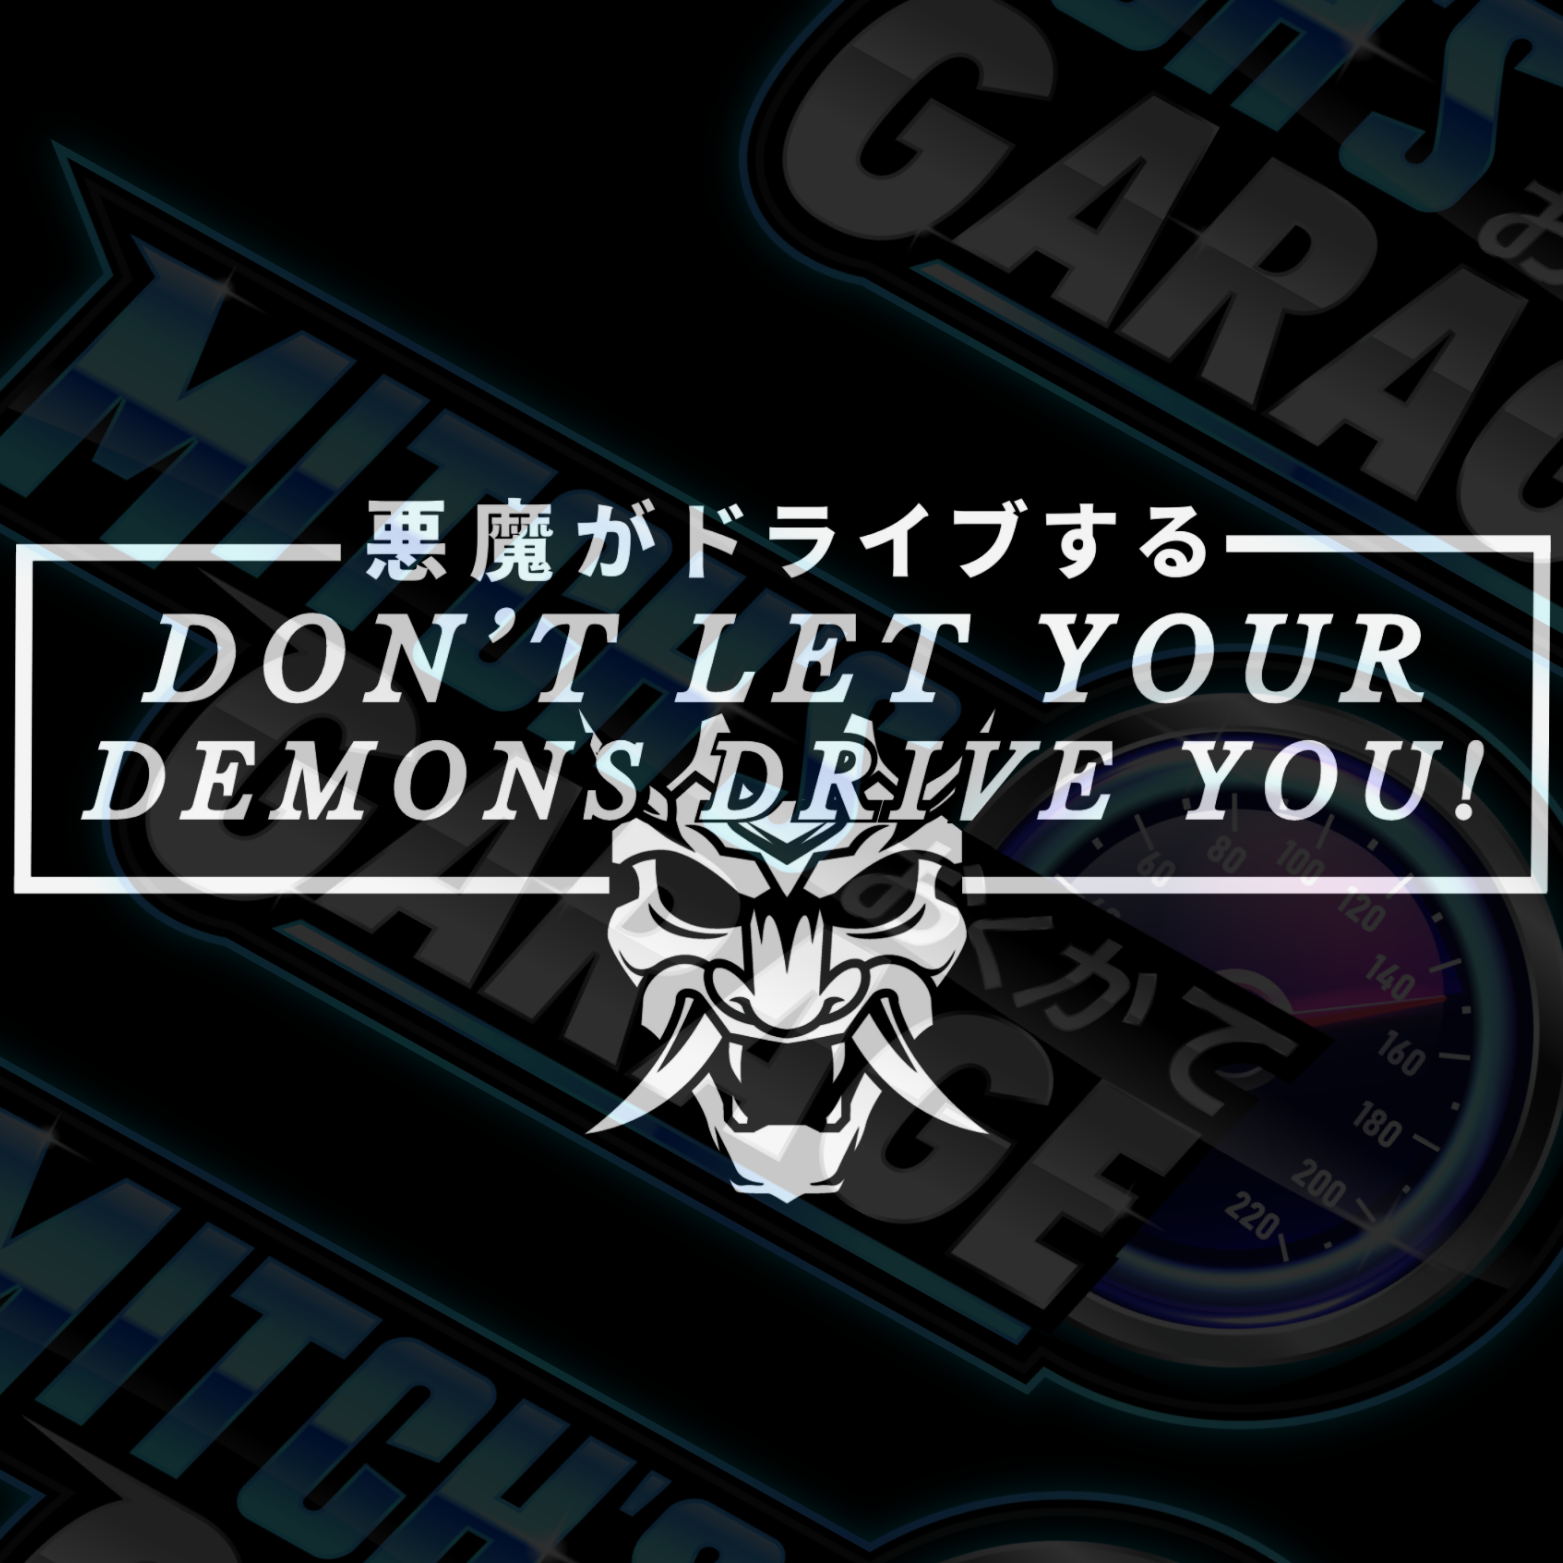 Don't Let Your Demons Drive You! Vinyl Decal